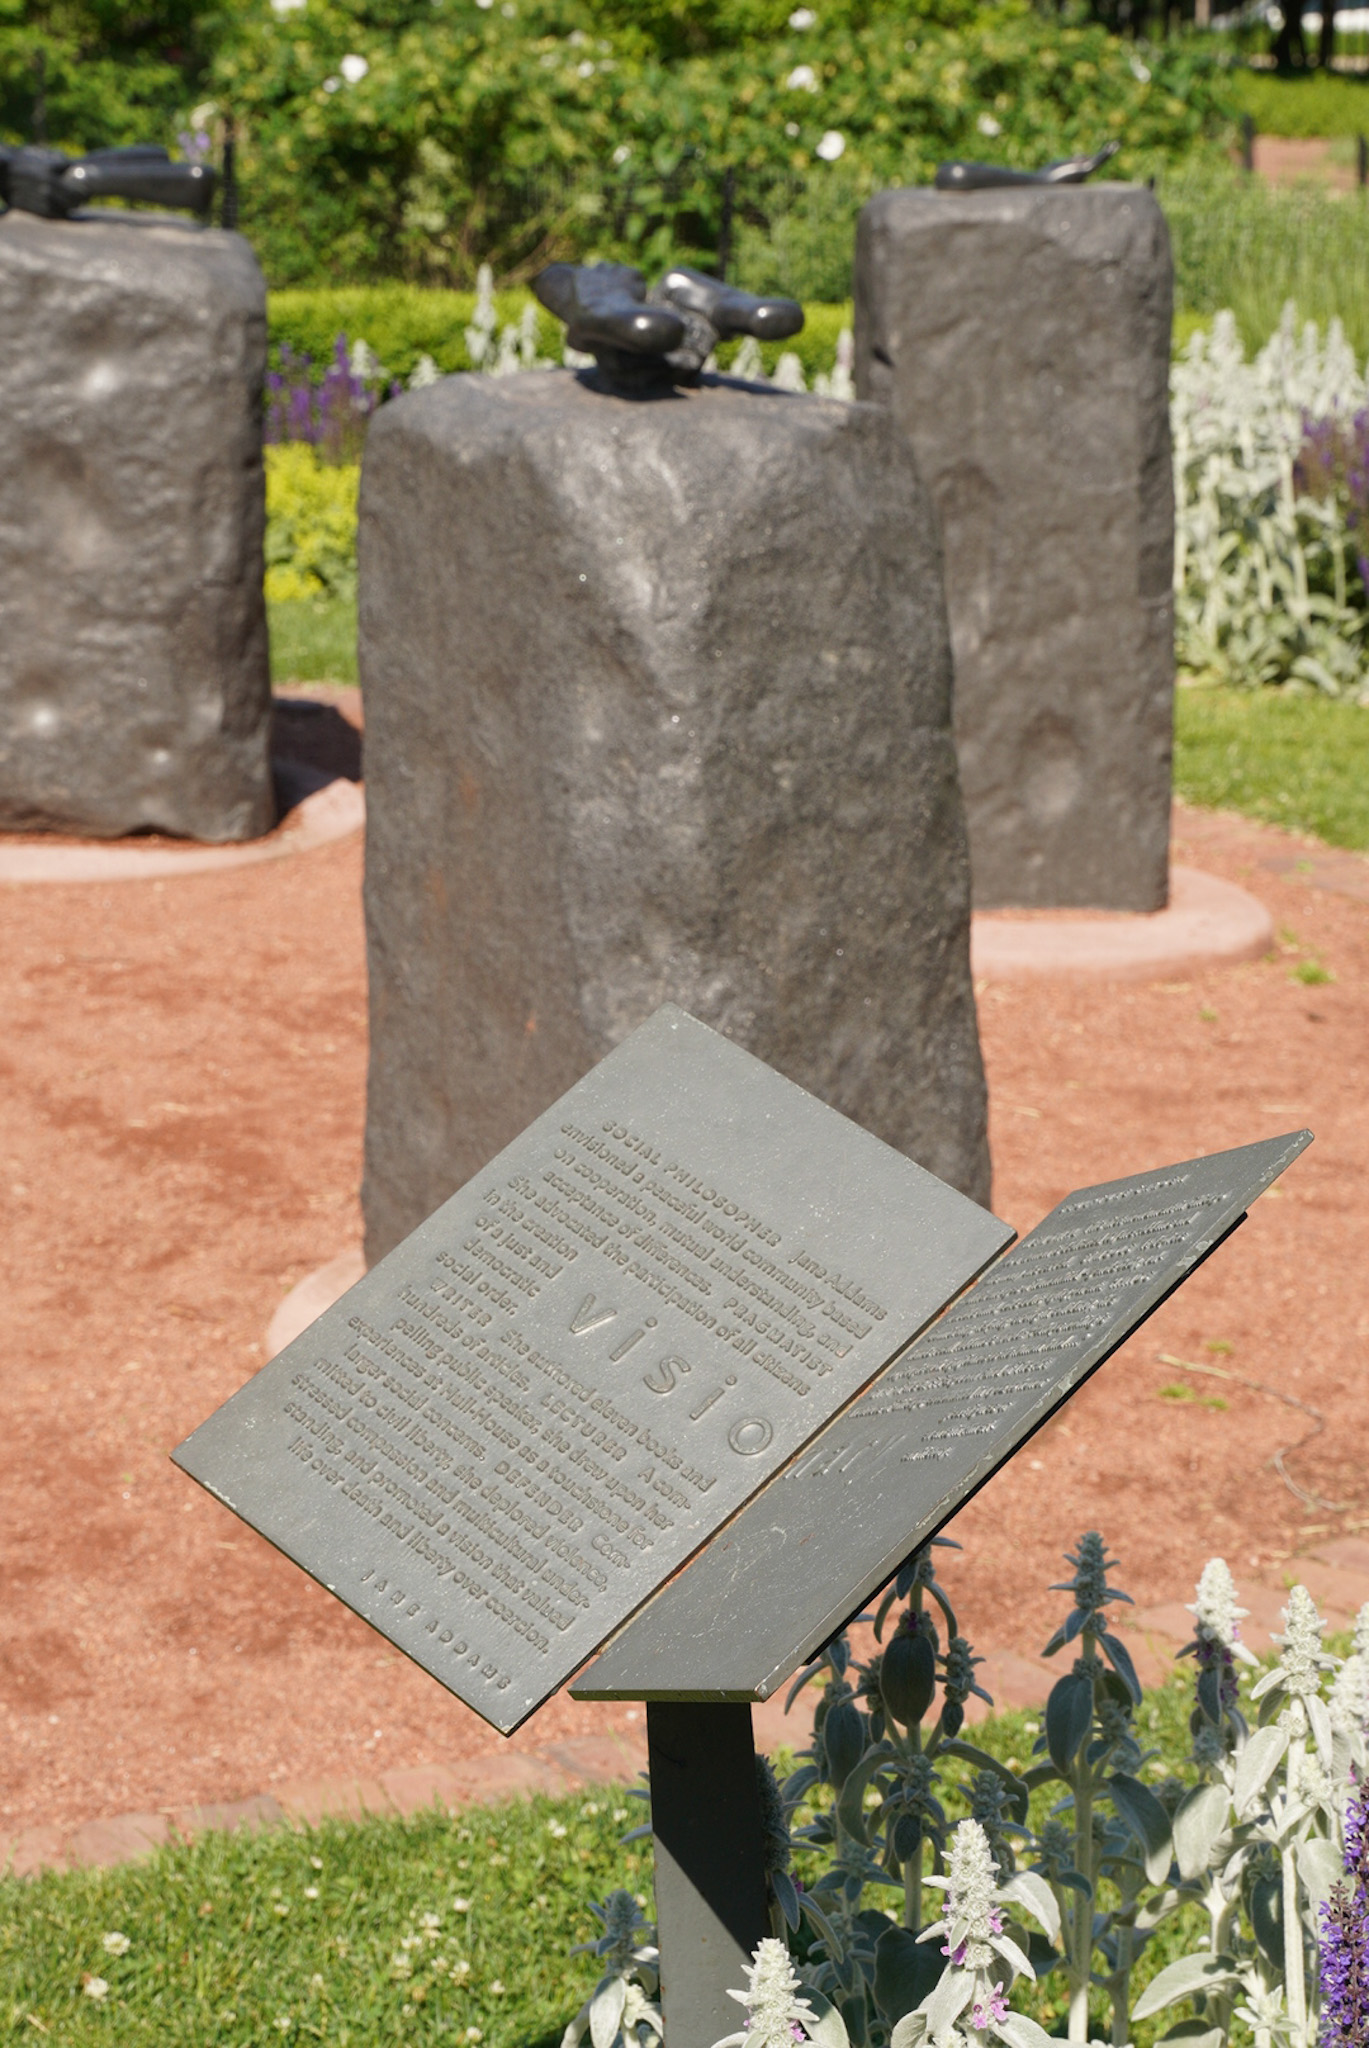 Metal text panel arranged like an open book in front of an abstract stone sculpture